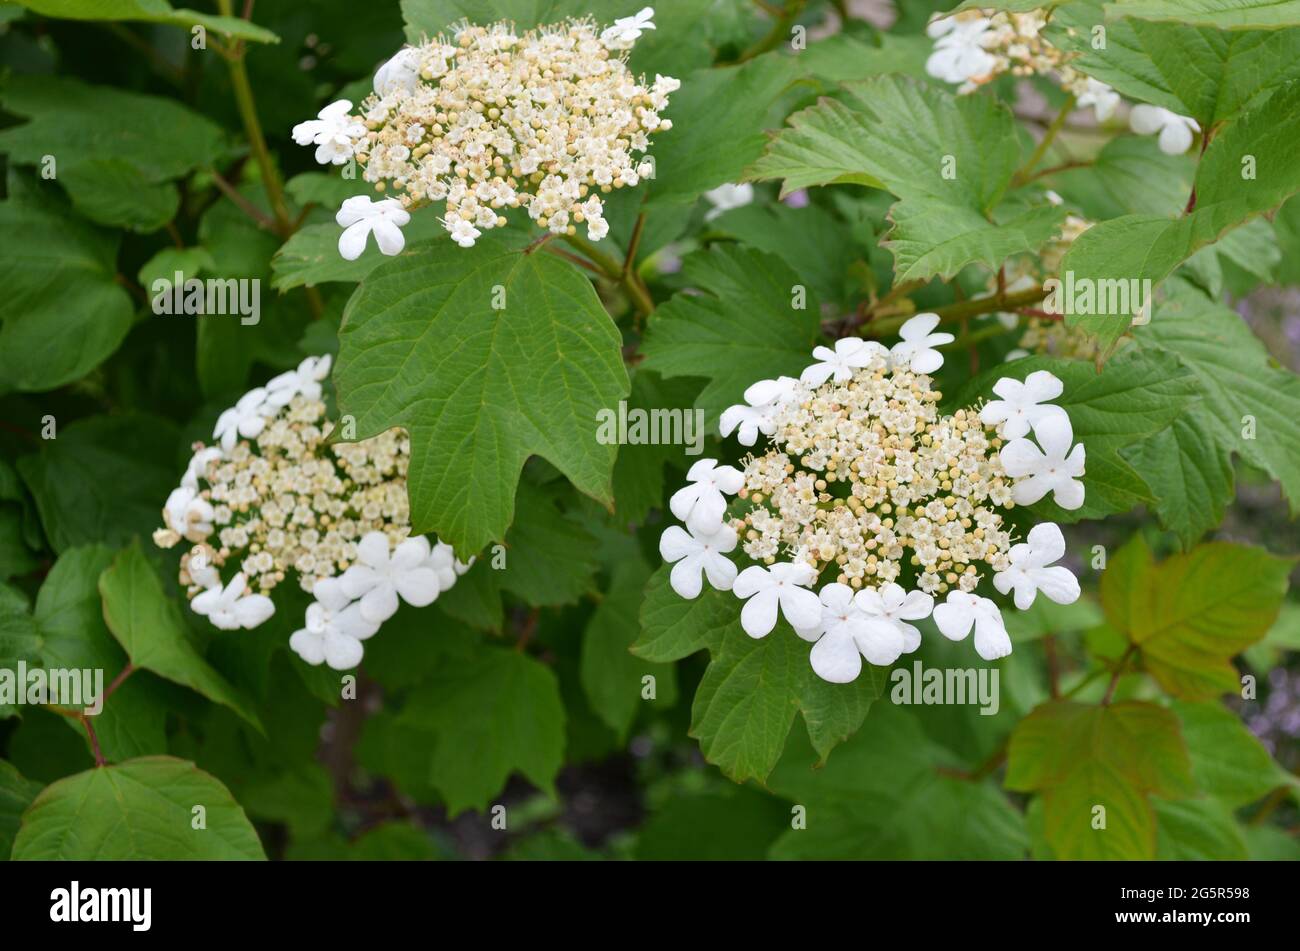 White viburnum flowers and green foliage. Viburnum opulus - medicinal and ornamental plant growing in the garden. Stock Photo